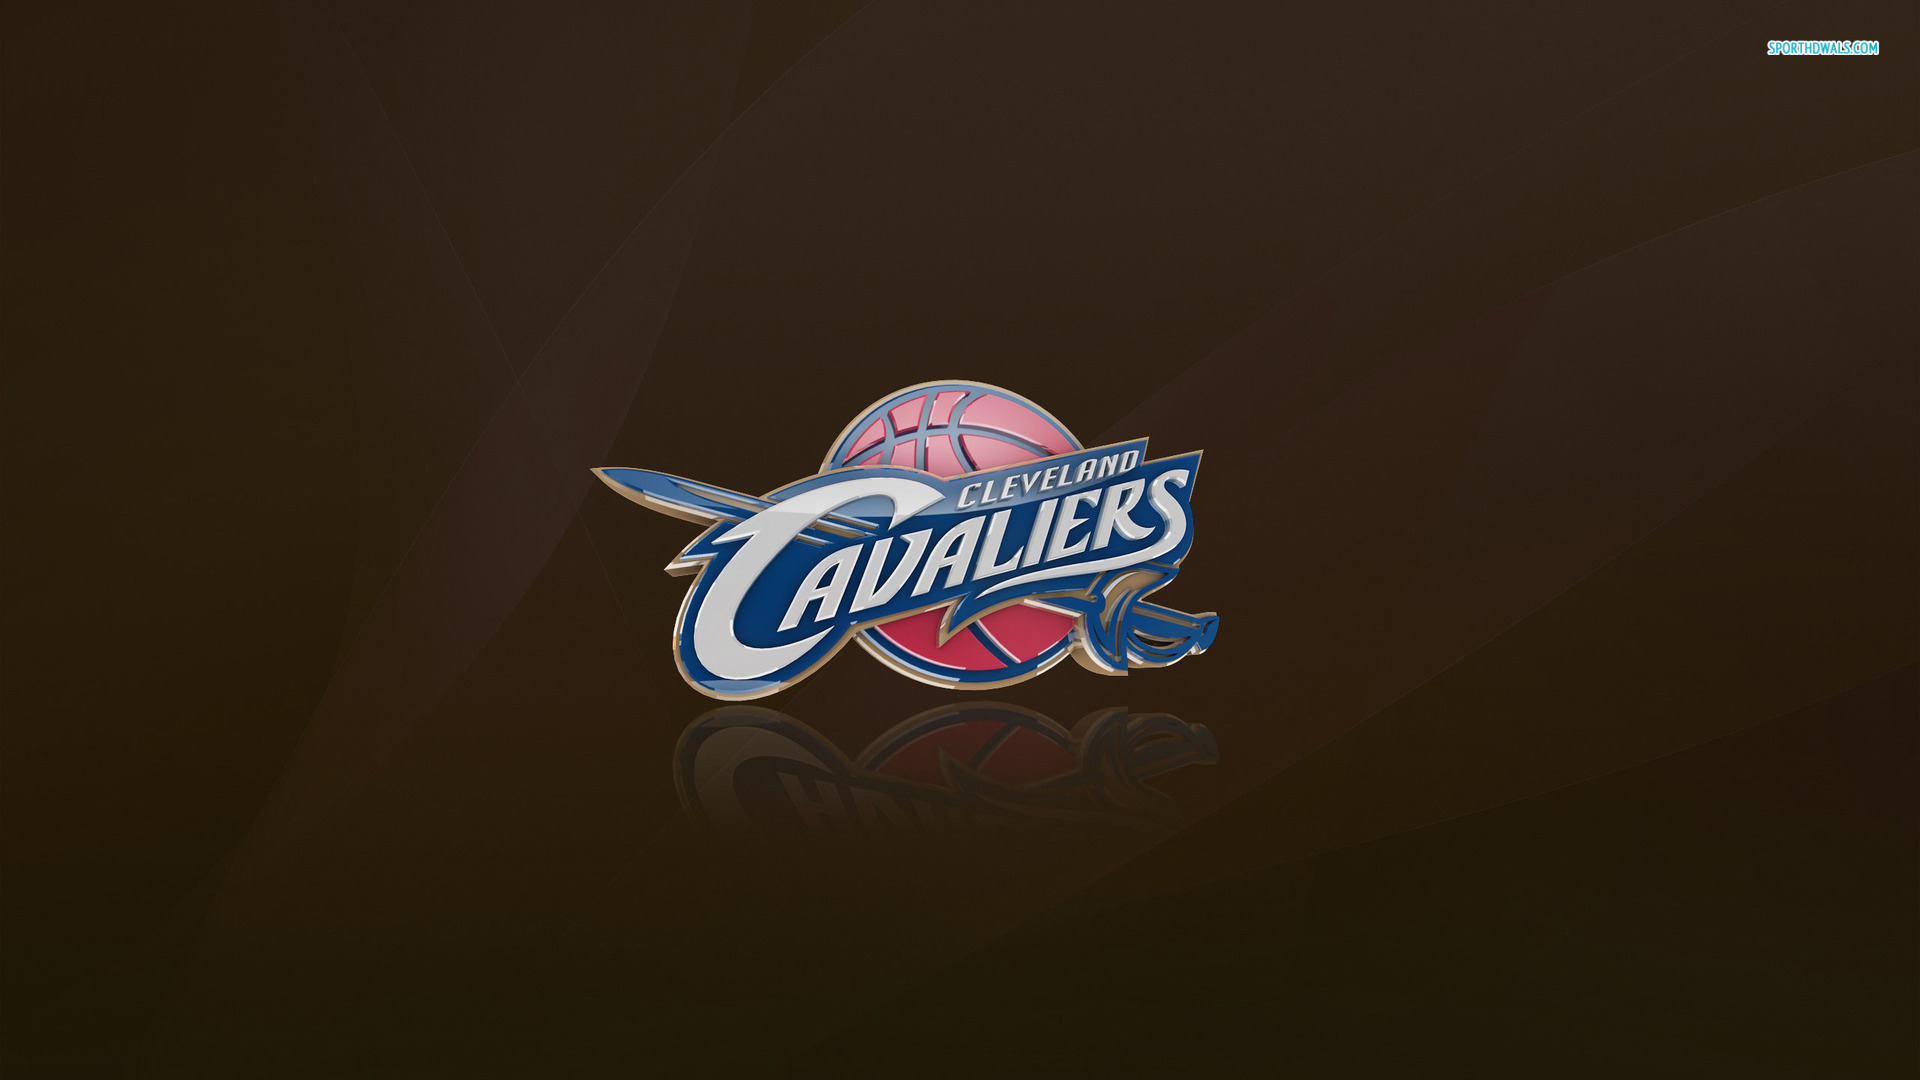 Cleveland Cavaliers HD Background Wallpaper